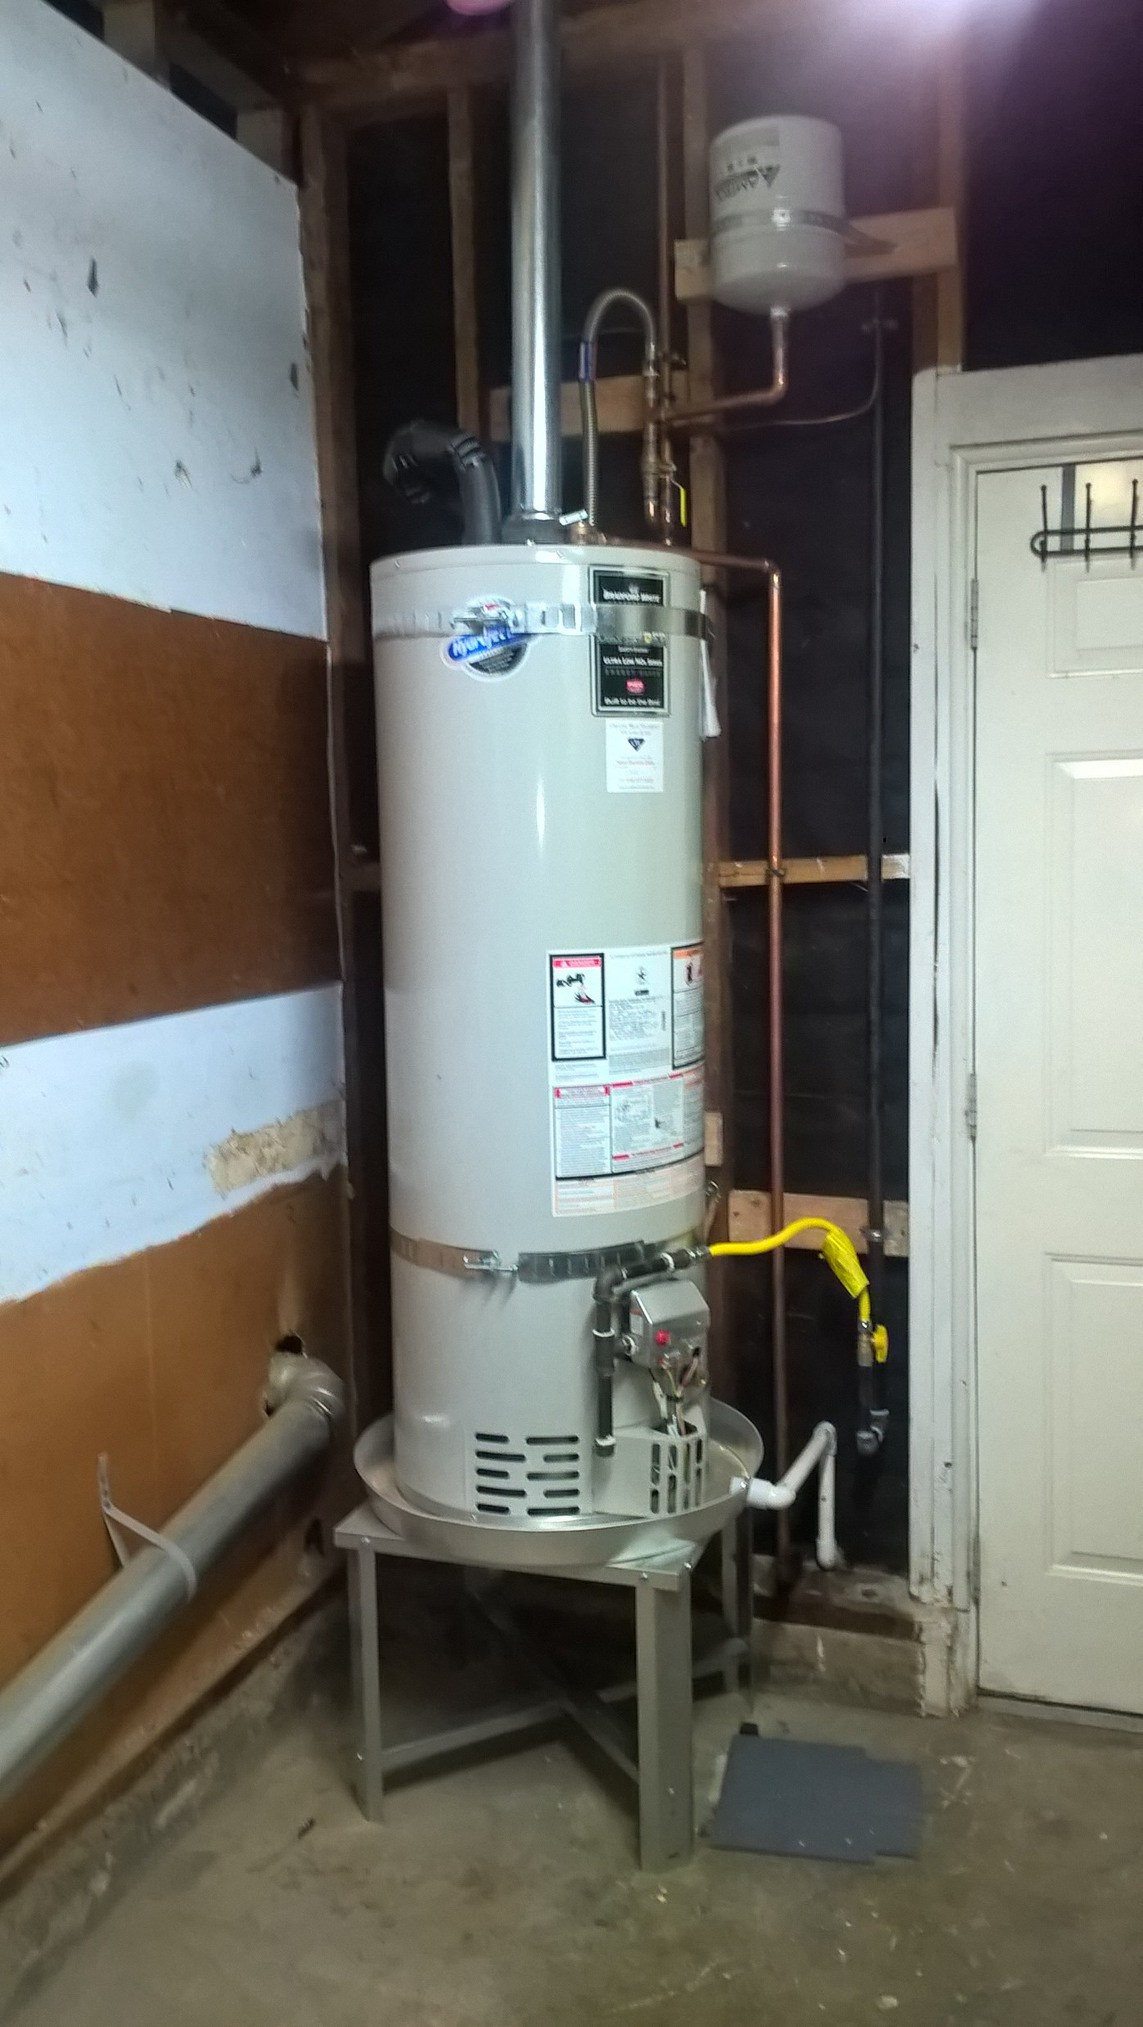 New Water Heater update dtd 20160120 pic 3.png